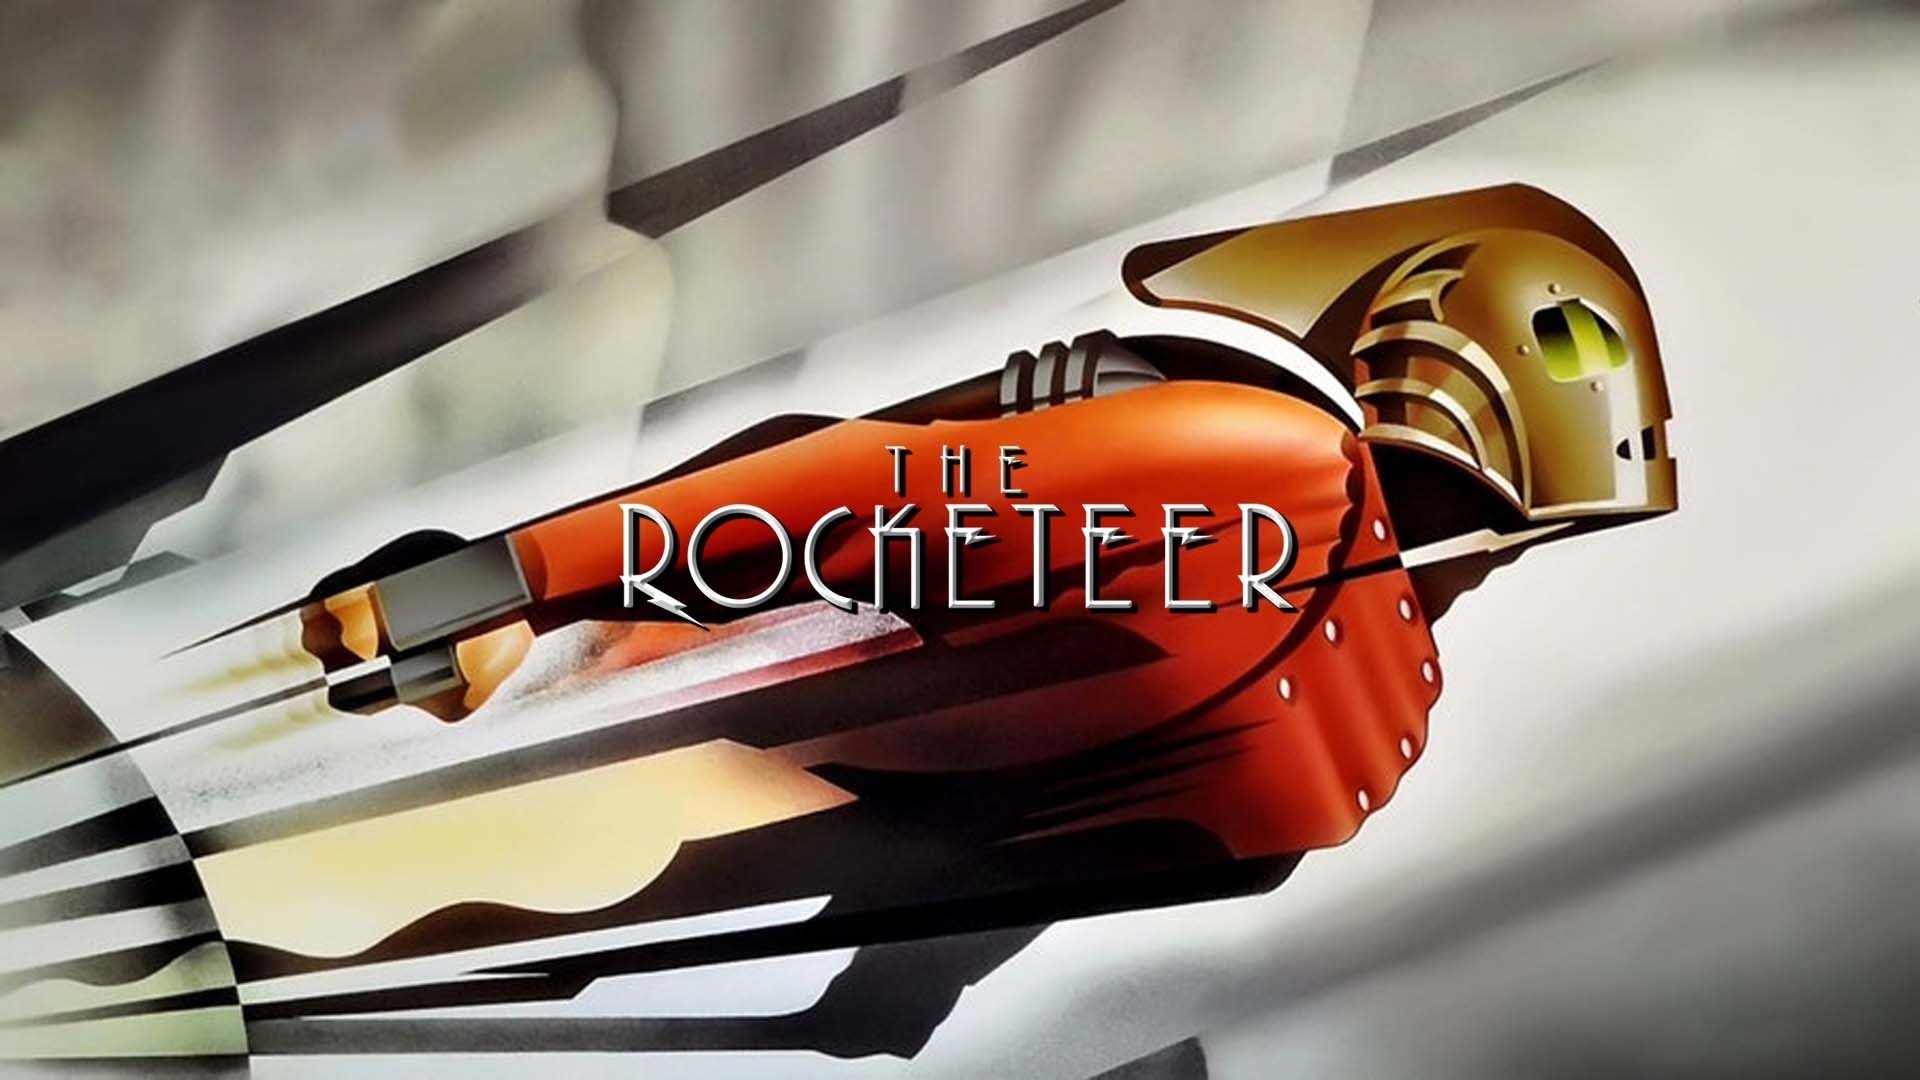 The Rocketeer Backgrounds, Compatible - PC, Mobile, Gadgets| 1920x1080 px